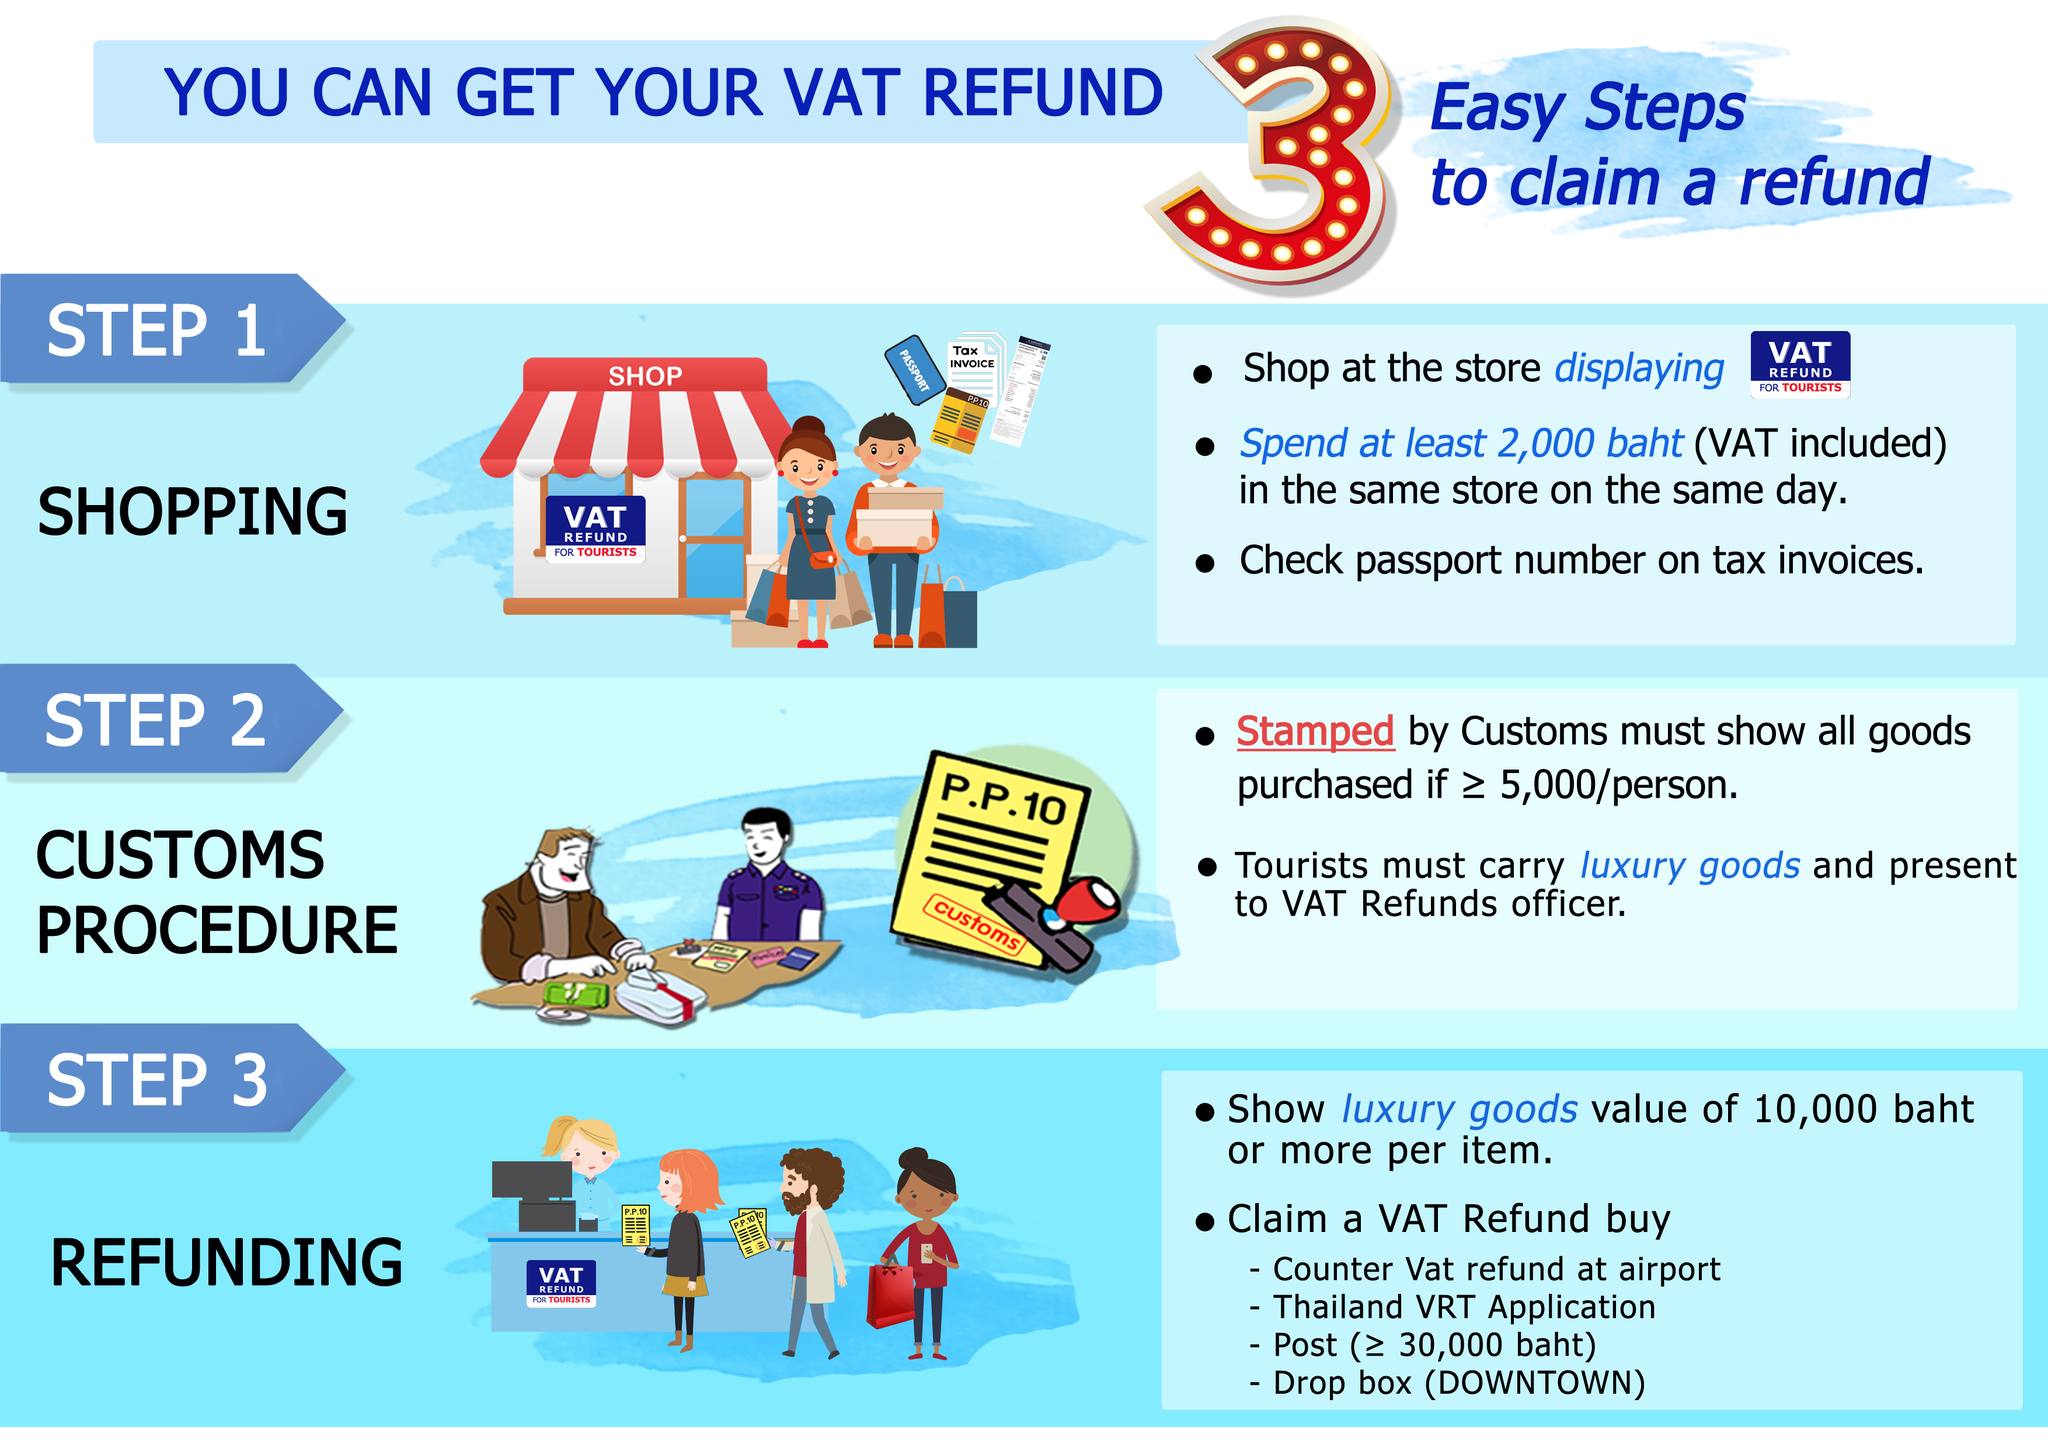 vat-refund-for-tourists-thailand-3-easy-steps-to-claim-a-refund